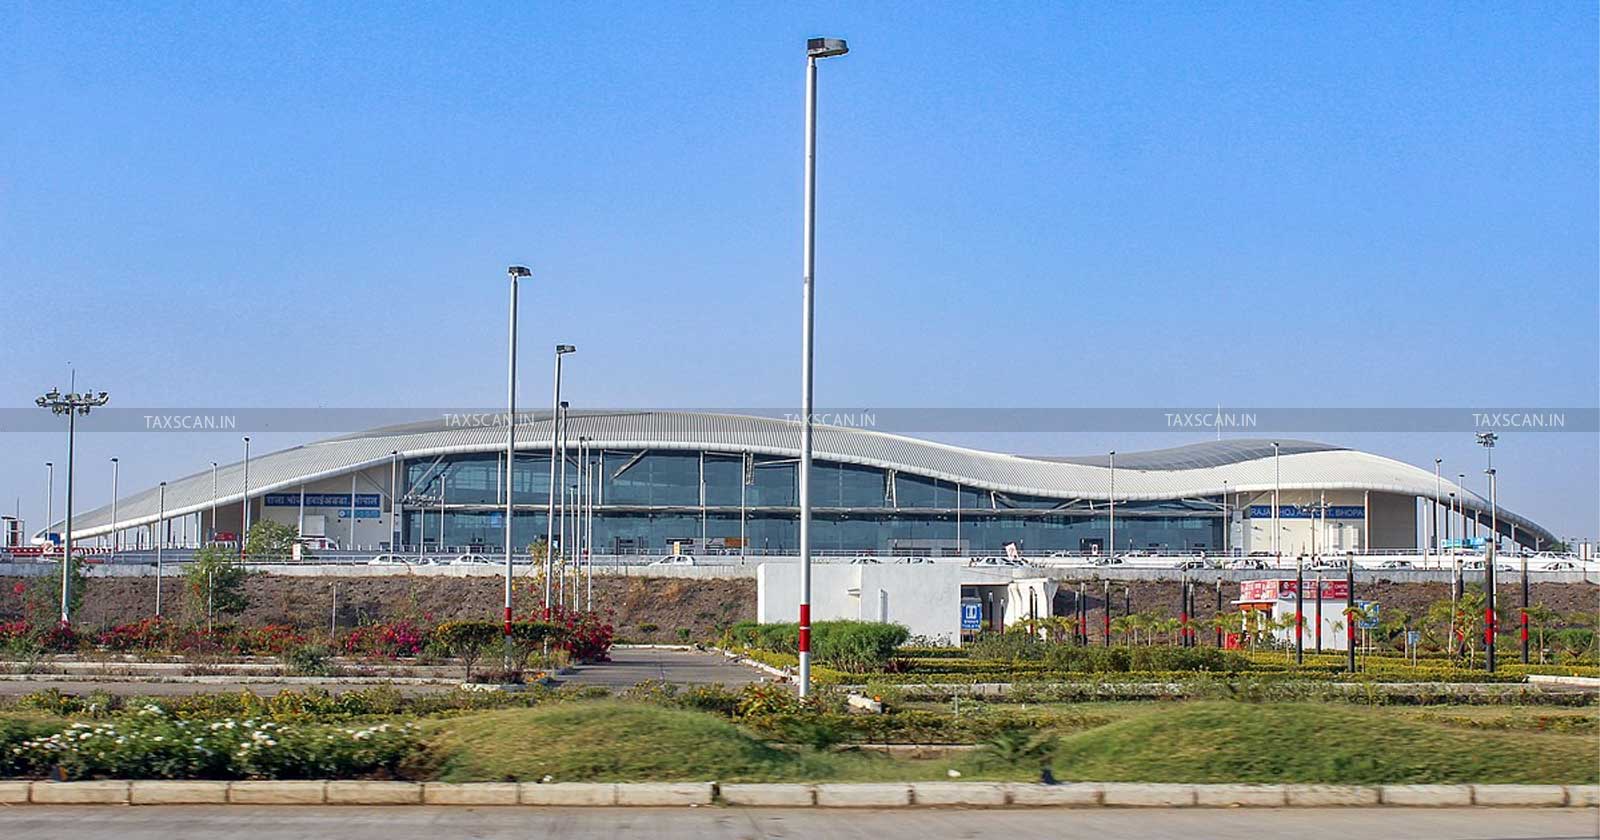 CBIC - Central Board of Indirect Taxes and Customs - Bhopal Airport - taxscan